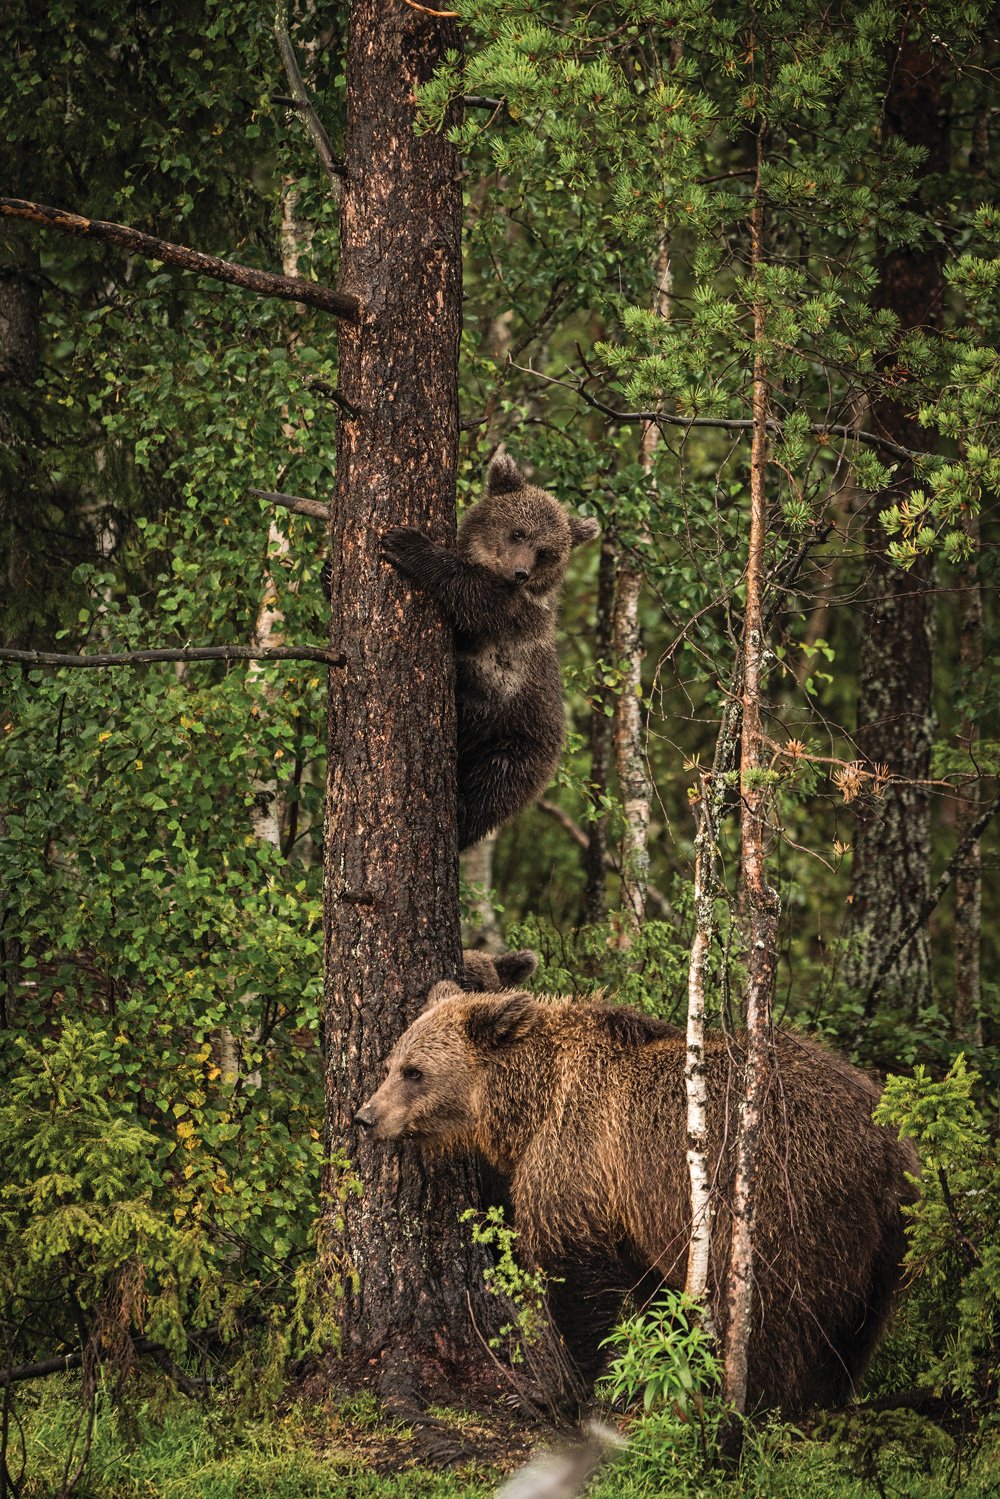 Male black bear and baby bear in Finland